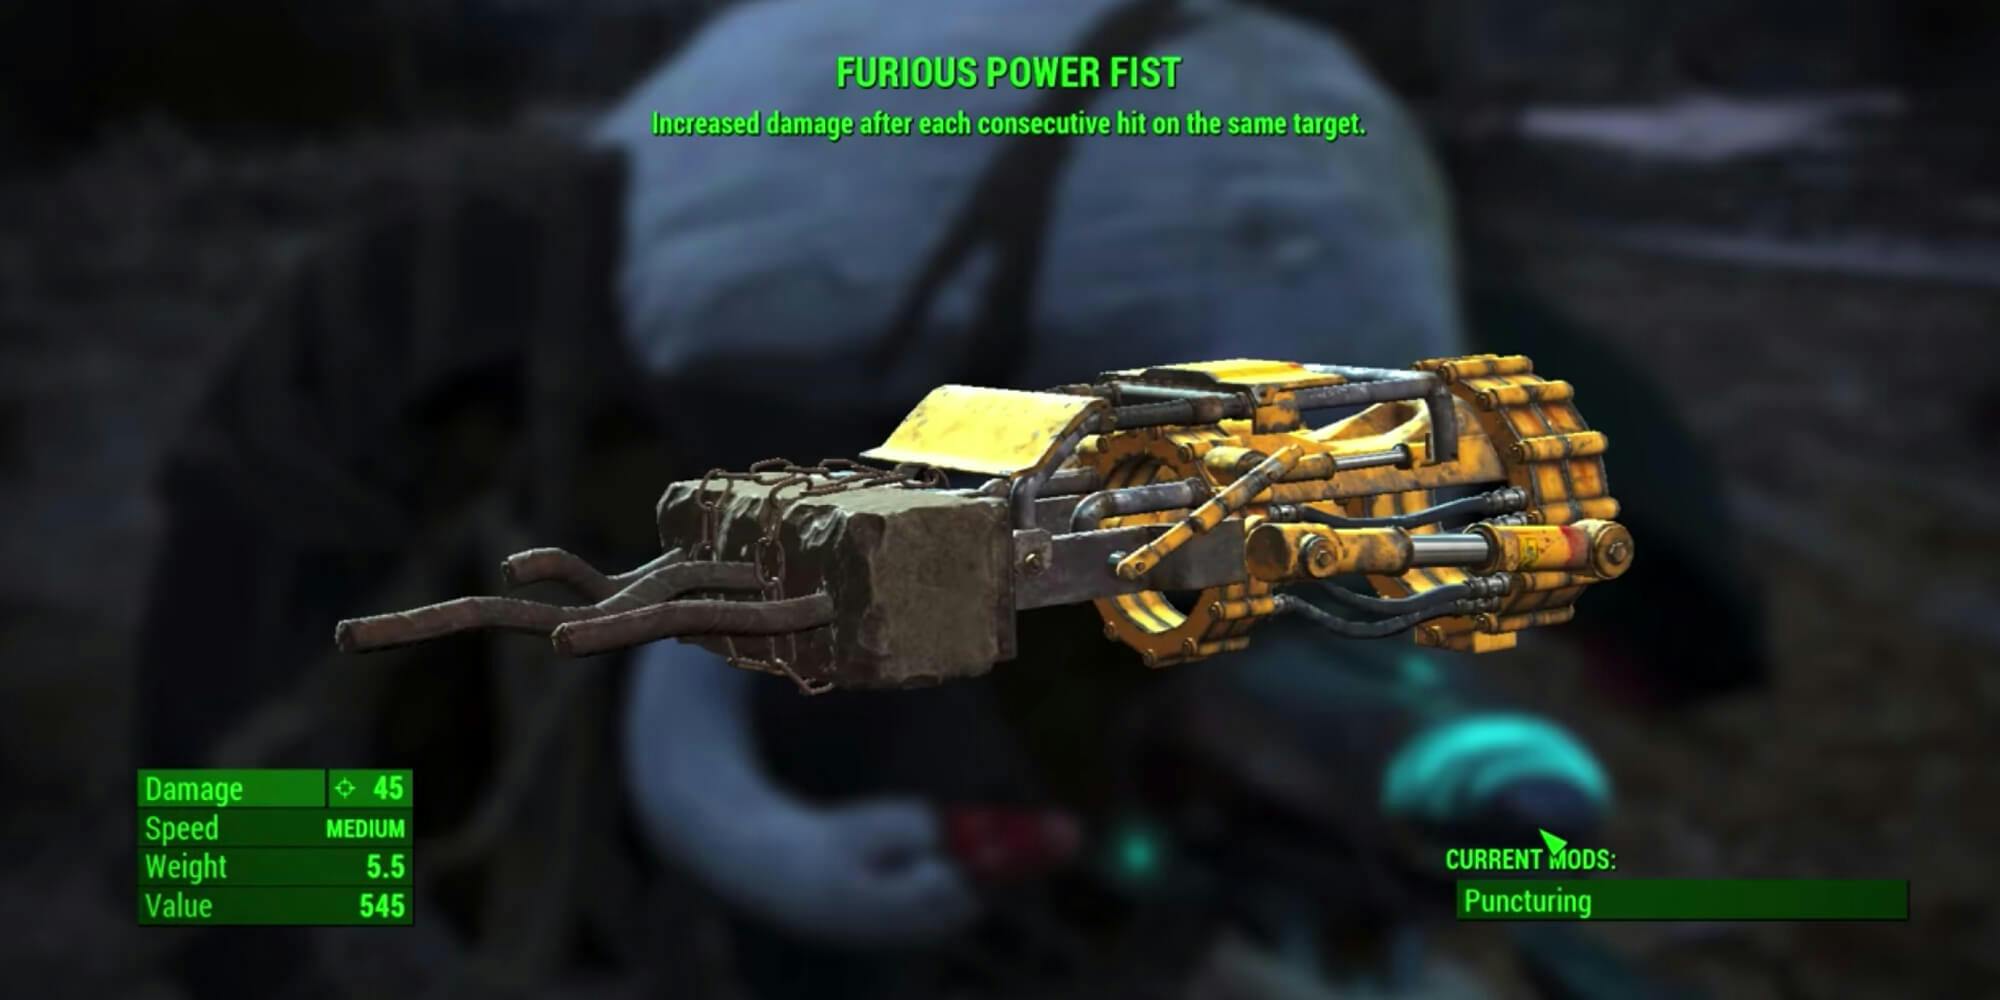 Fallout 4 weapons - Furious Power Fist